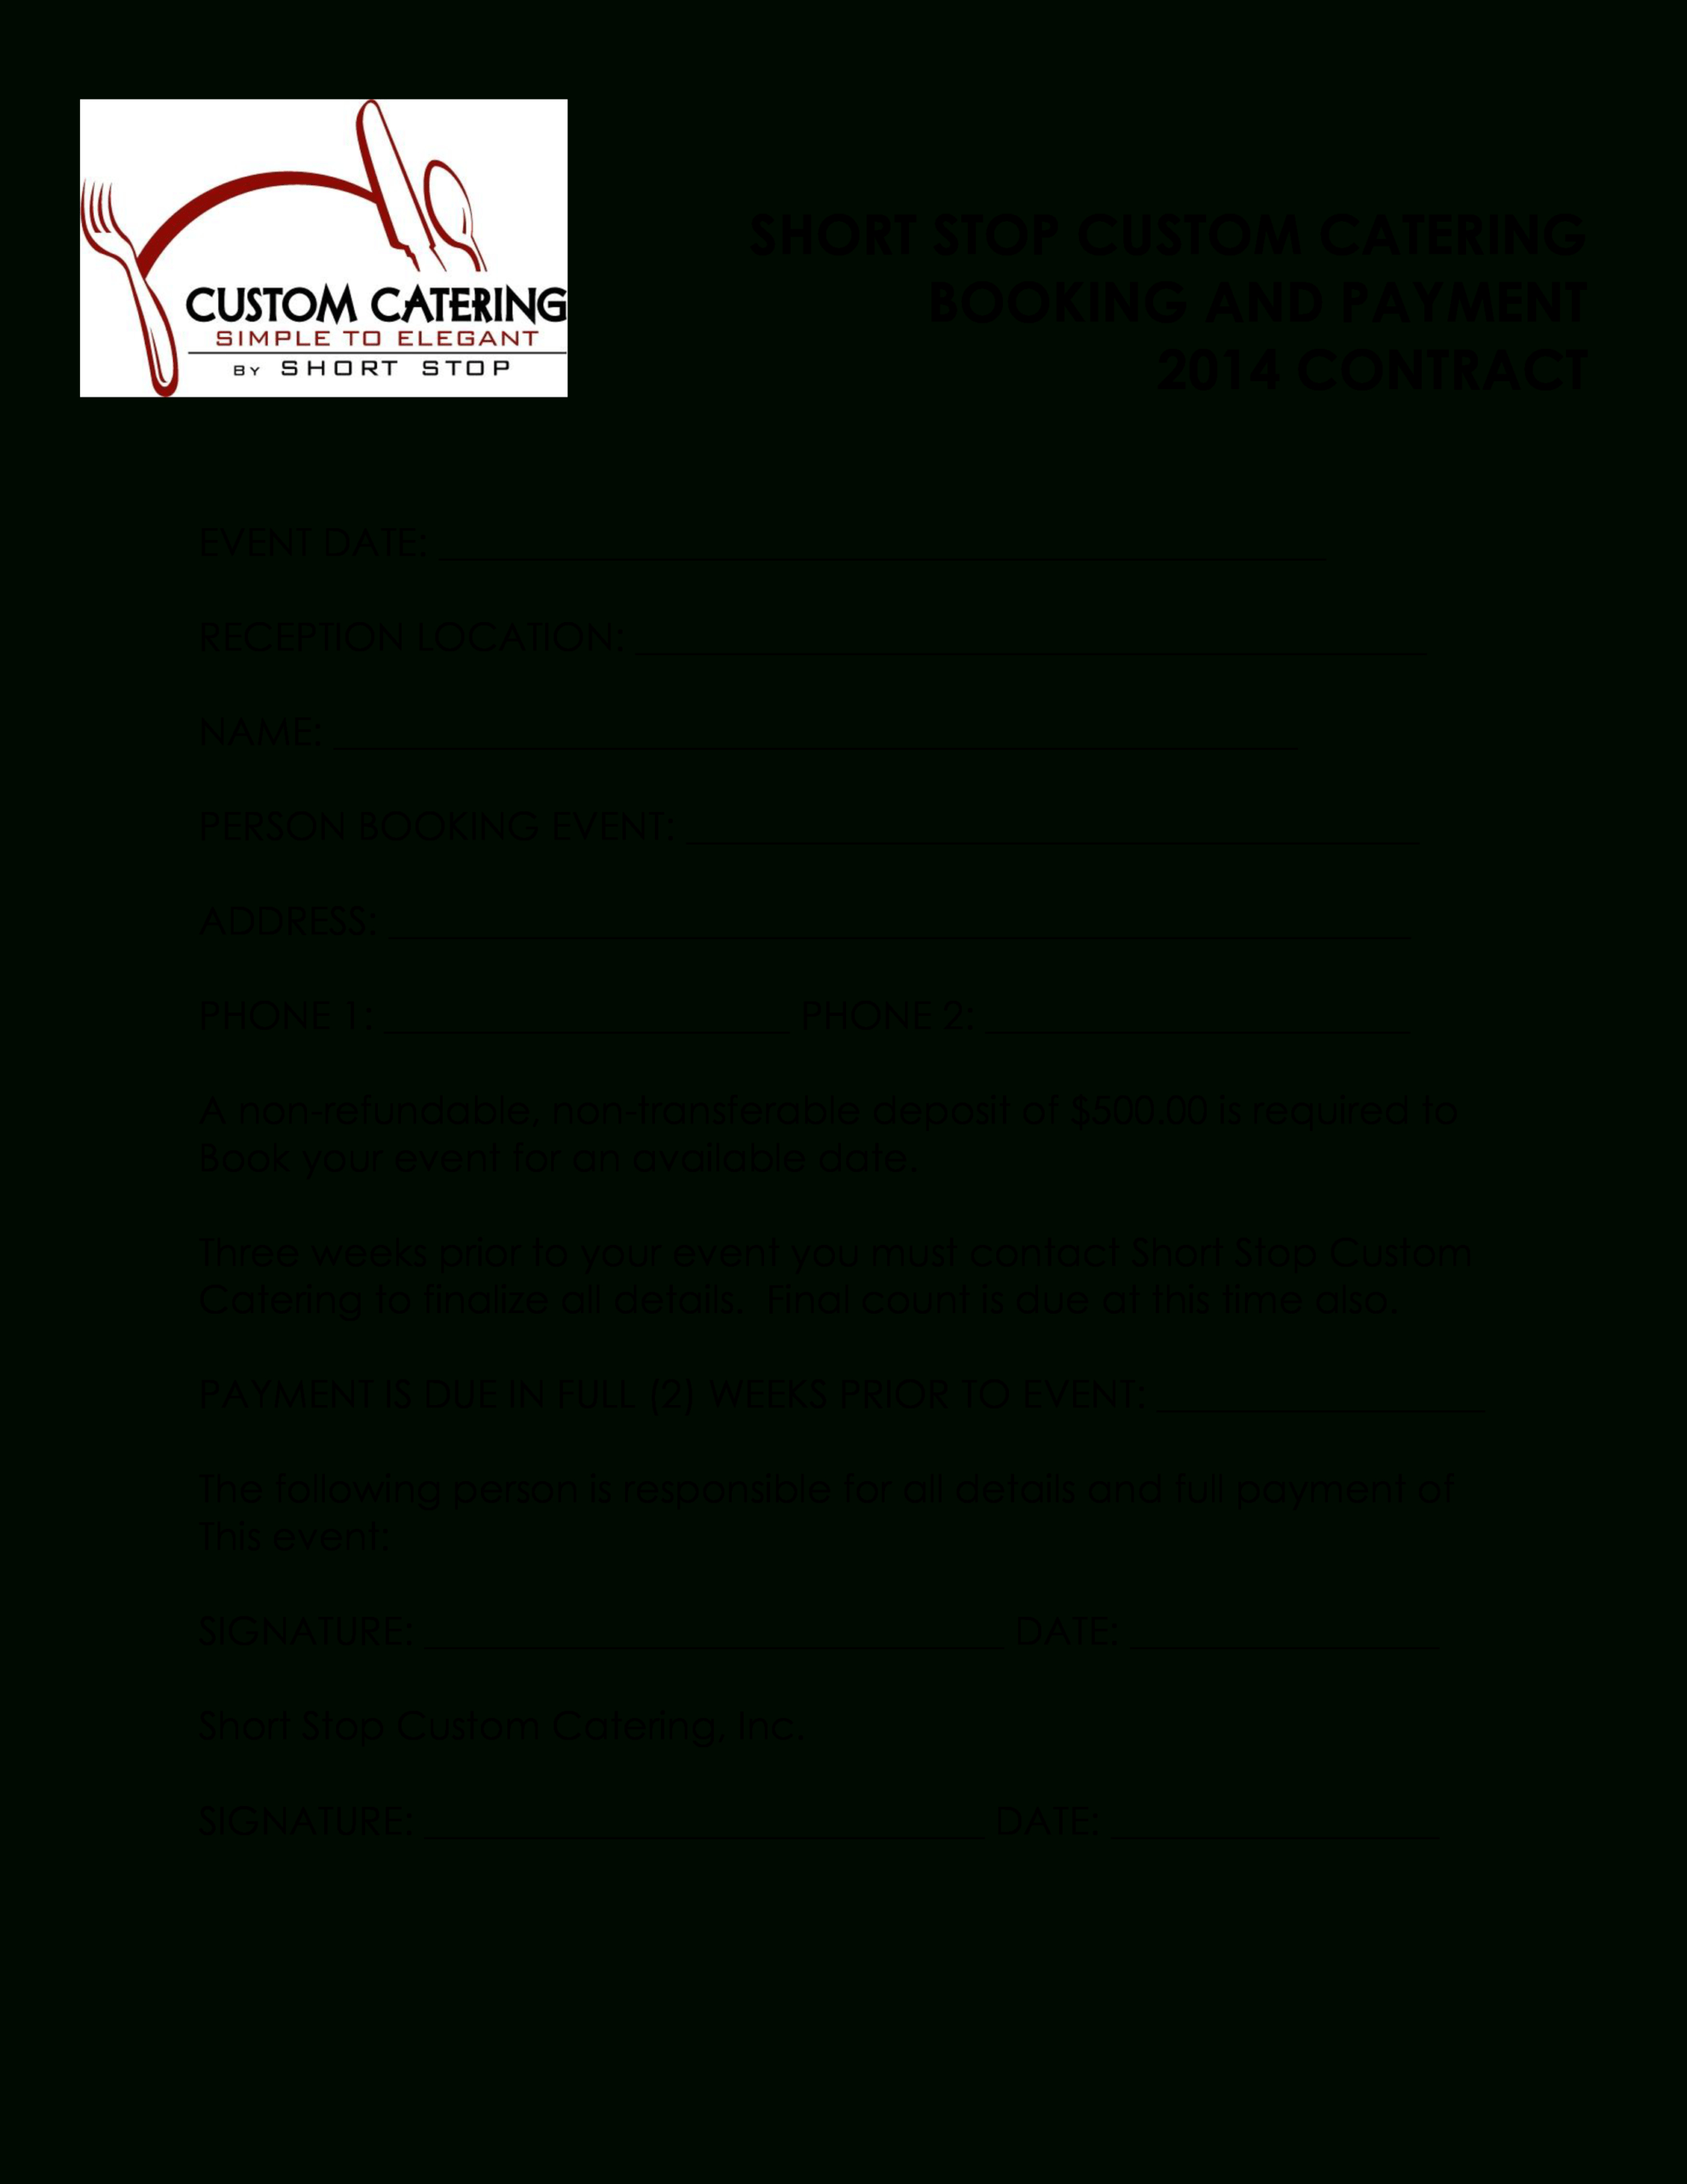 019 Free Catering Contract Template Ideas 2Eebed085048 1 For Catering Contract Template Word